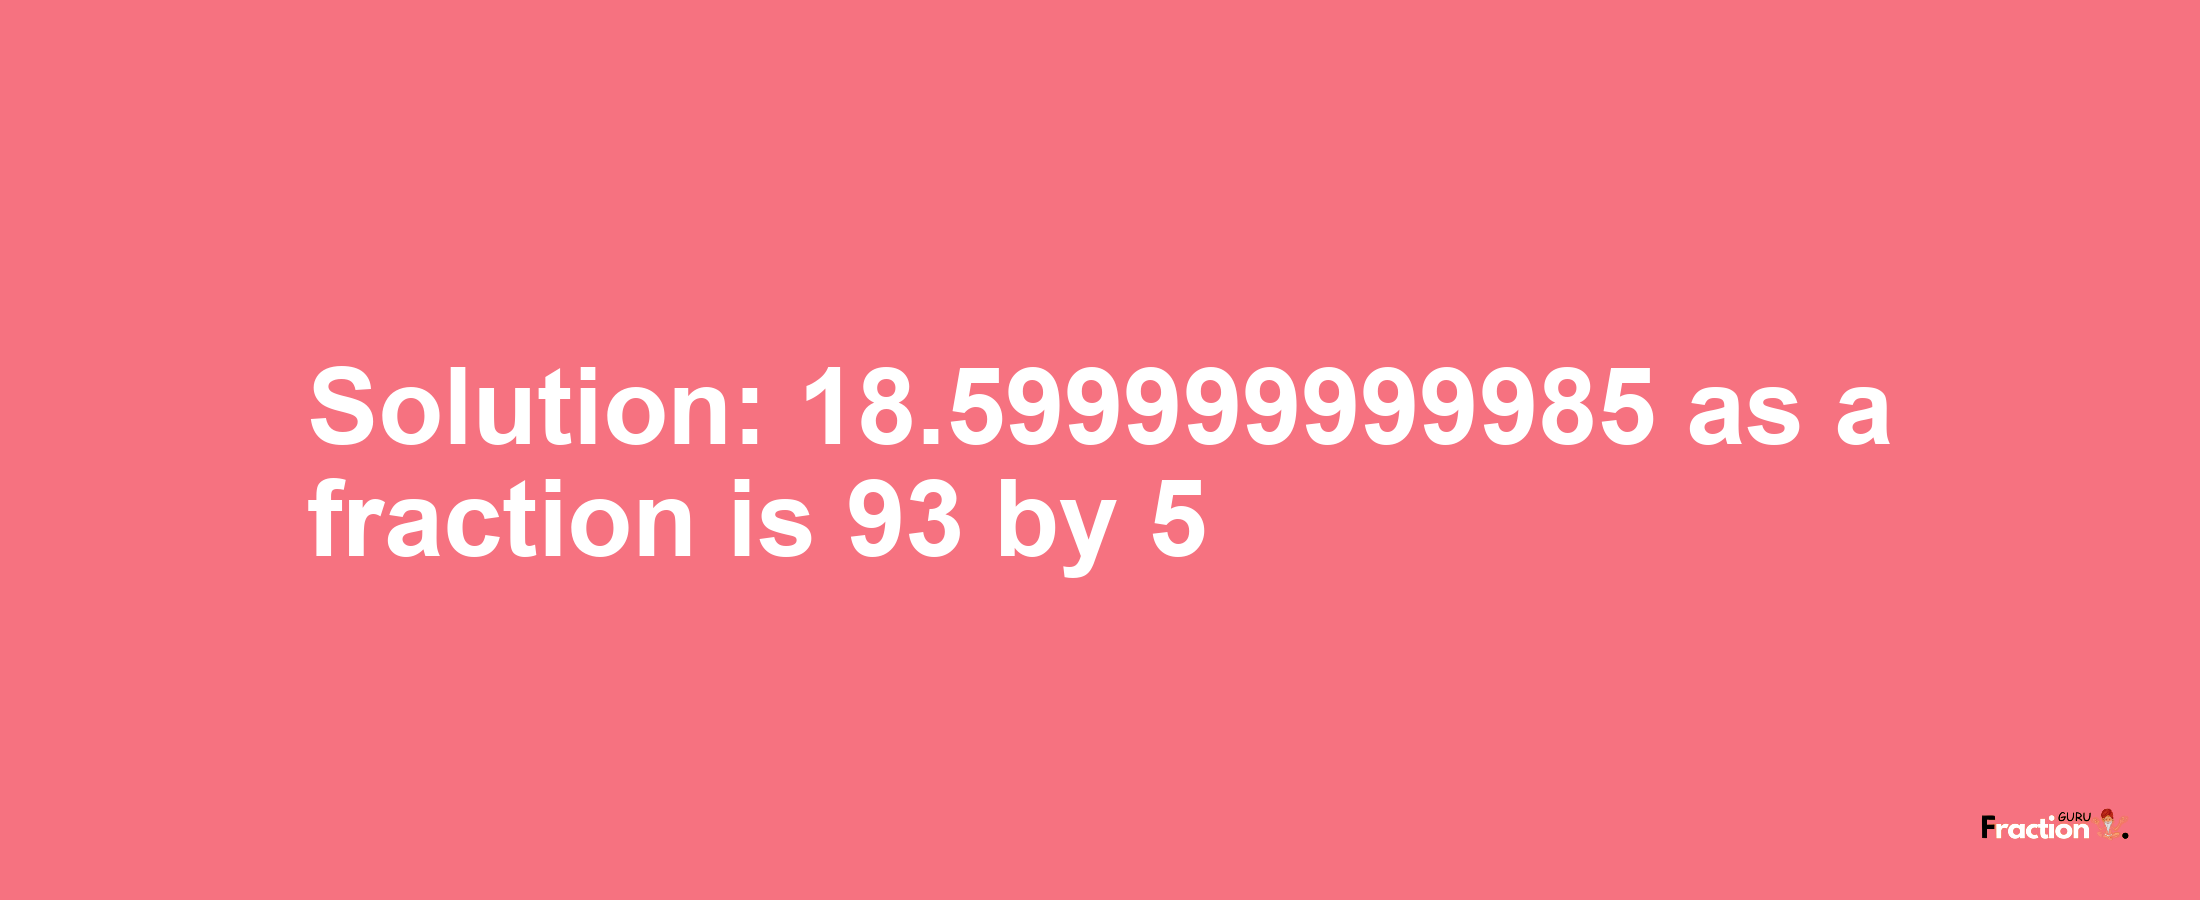 Solution:18.599999999985 as a fraction is 93/5